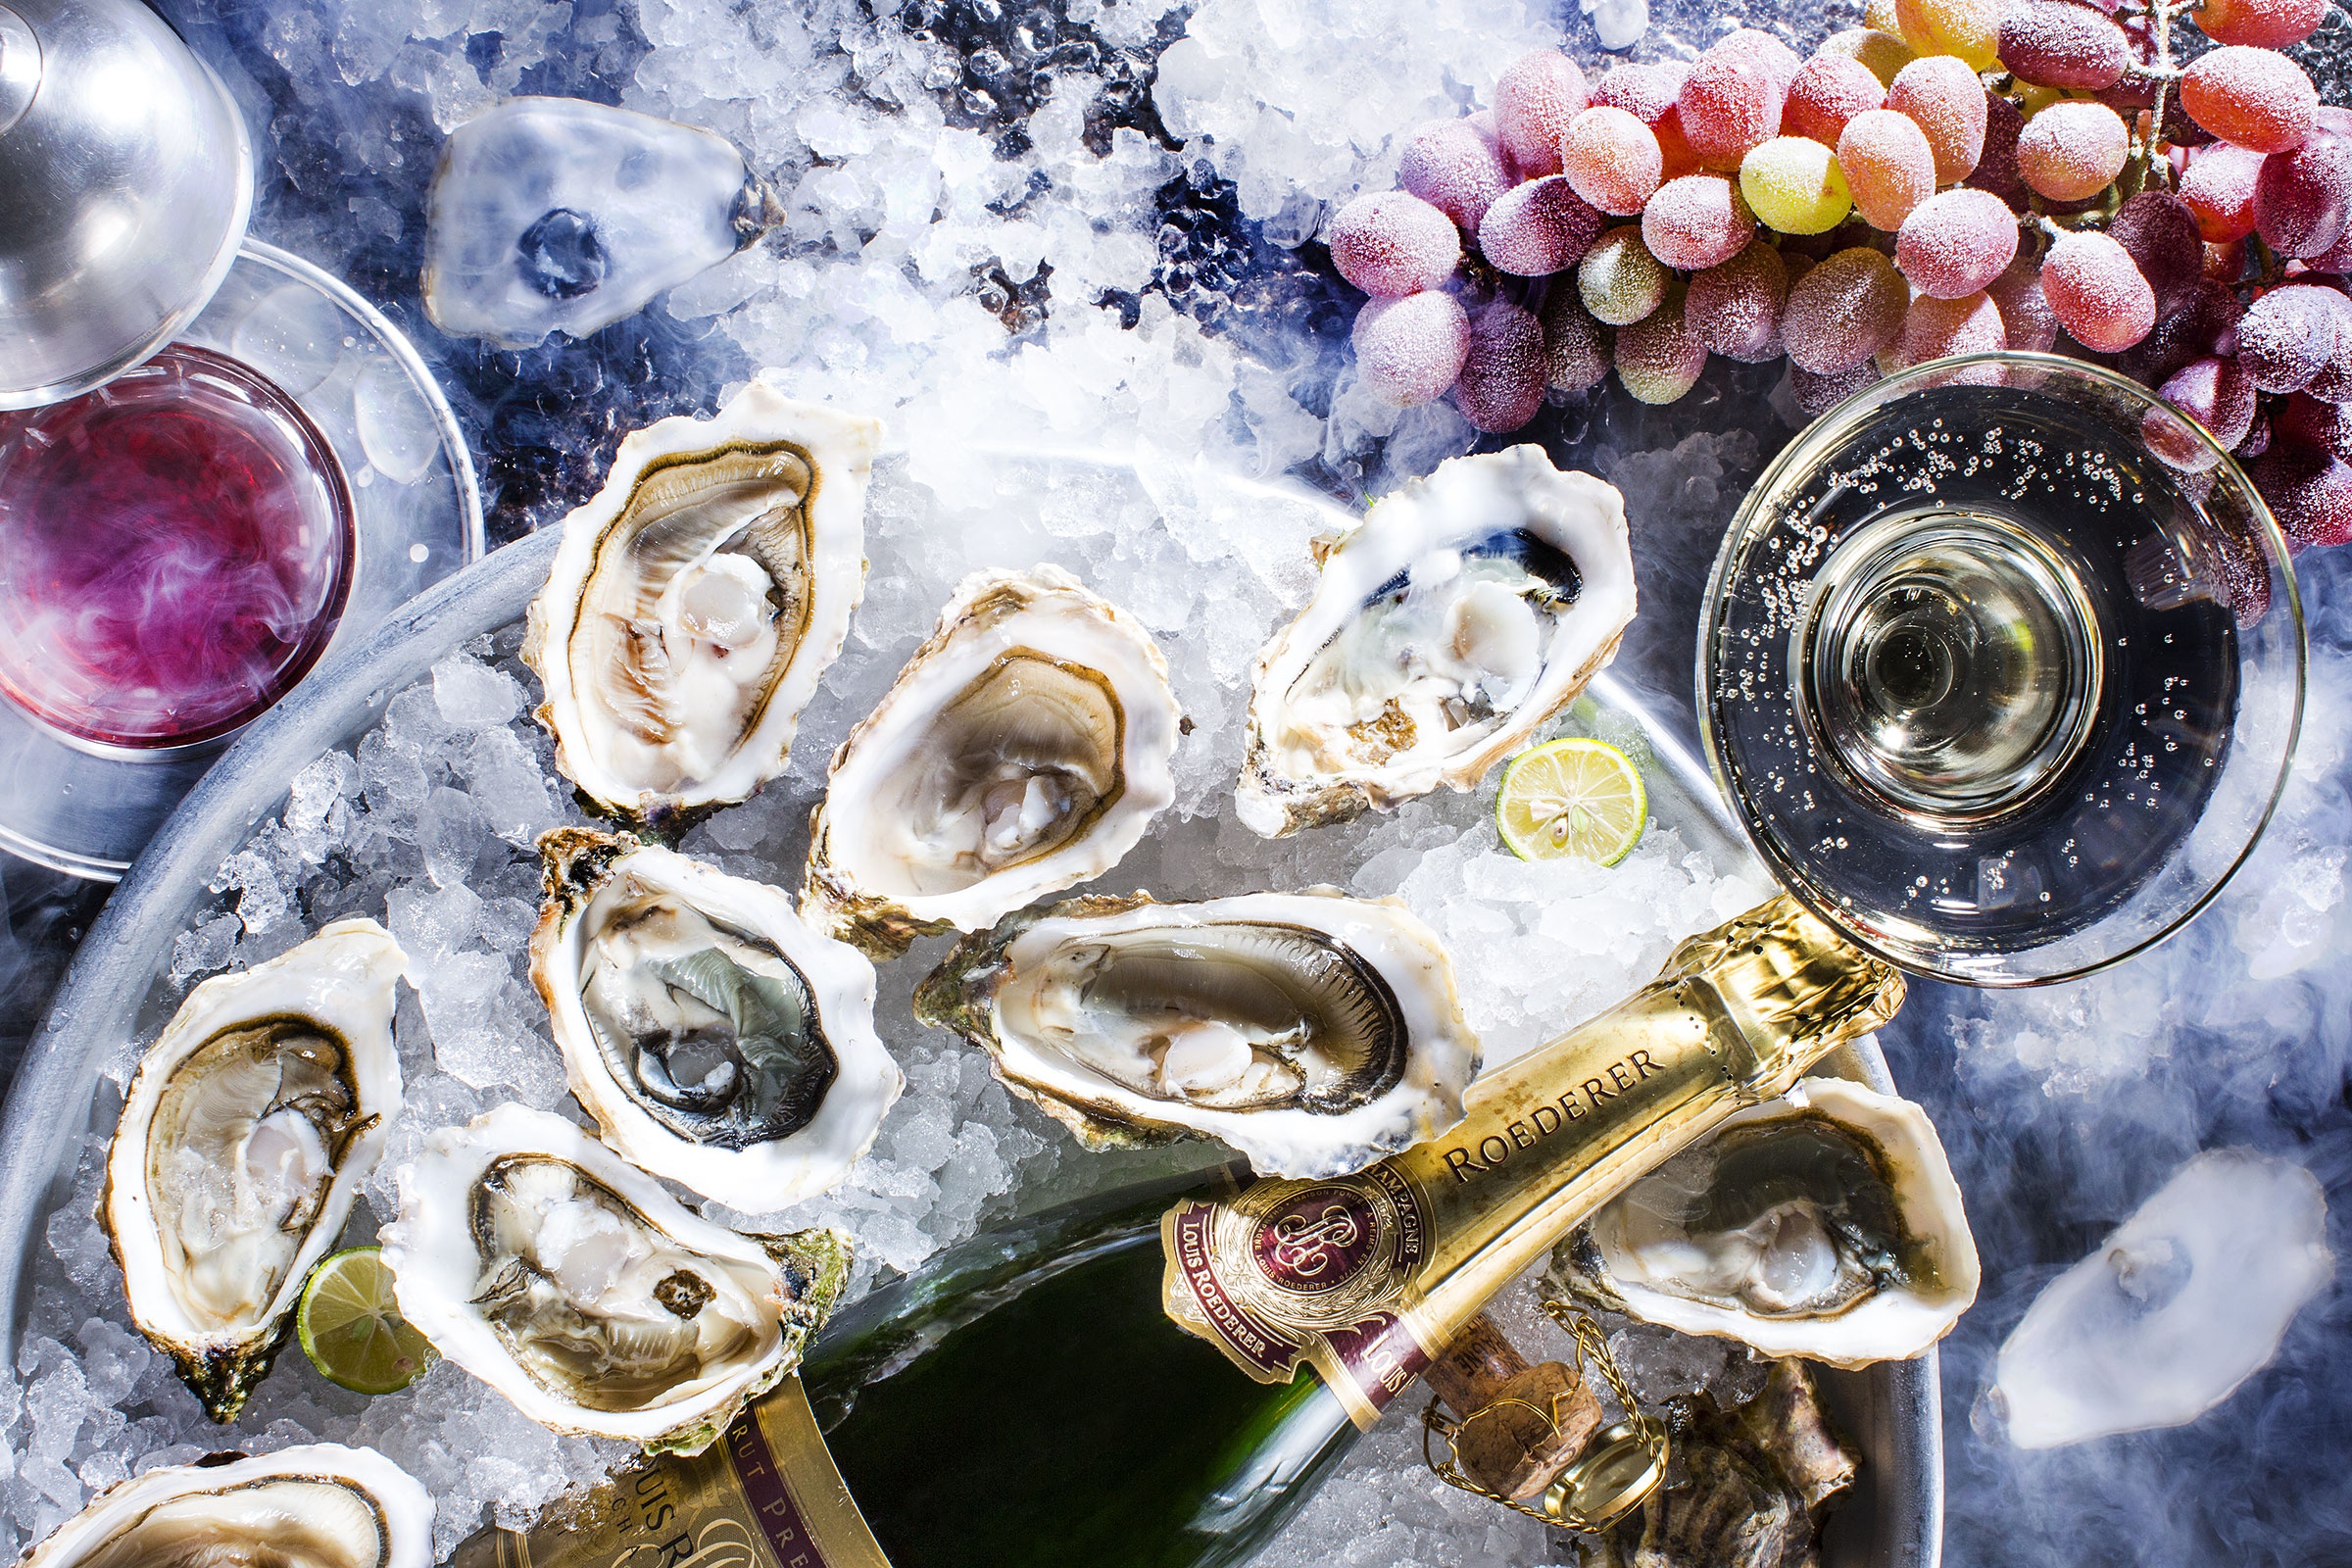 food, still life, champagne, grapes, mollusc, oyster, seafood